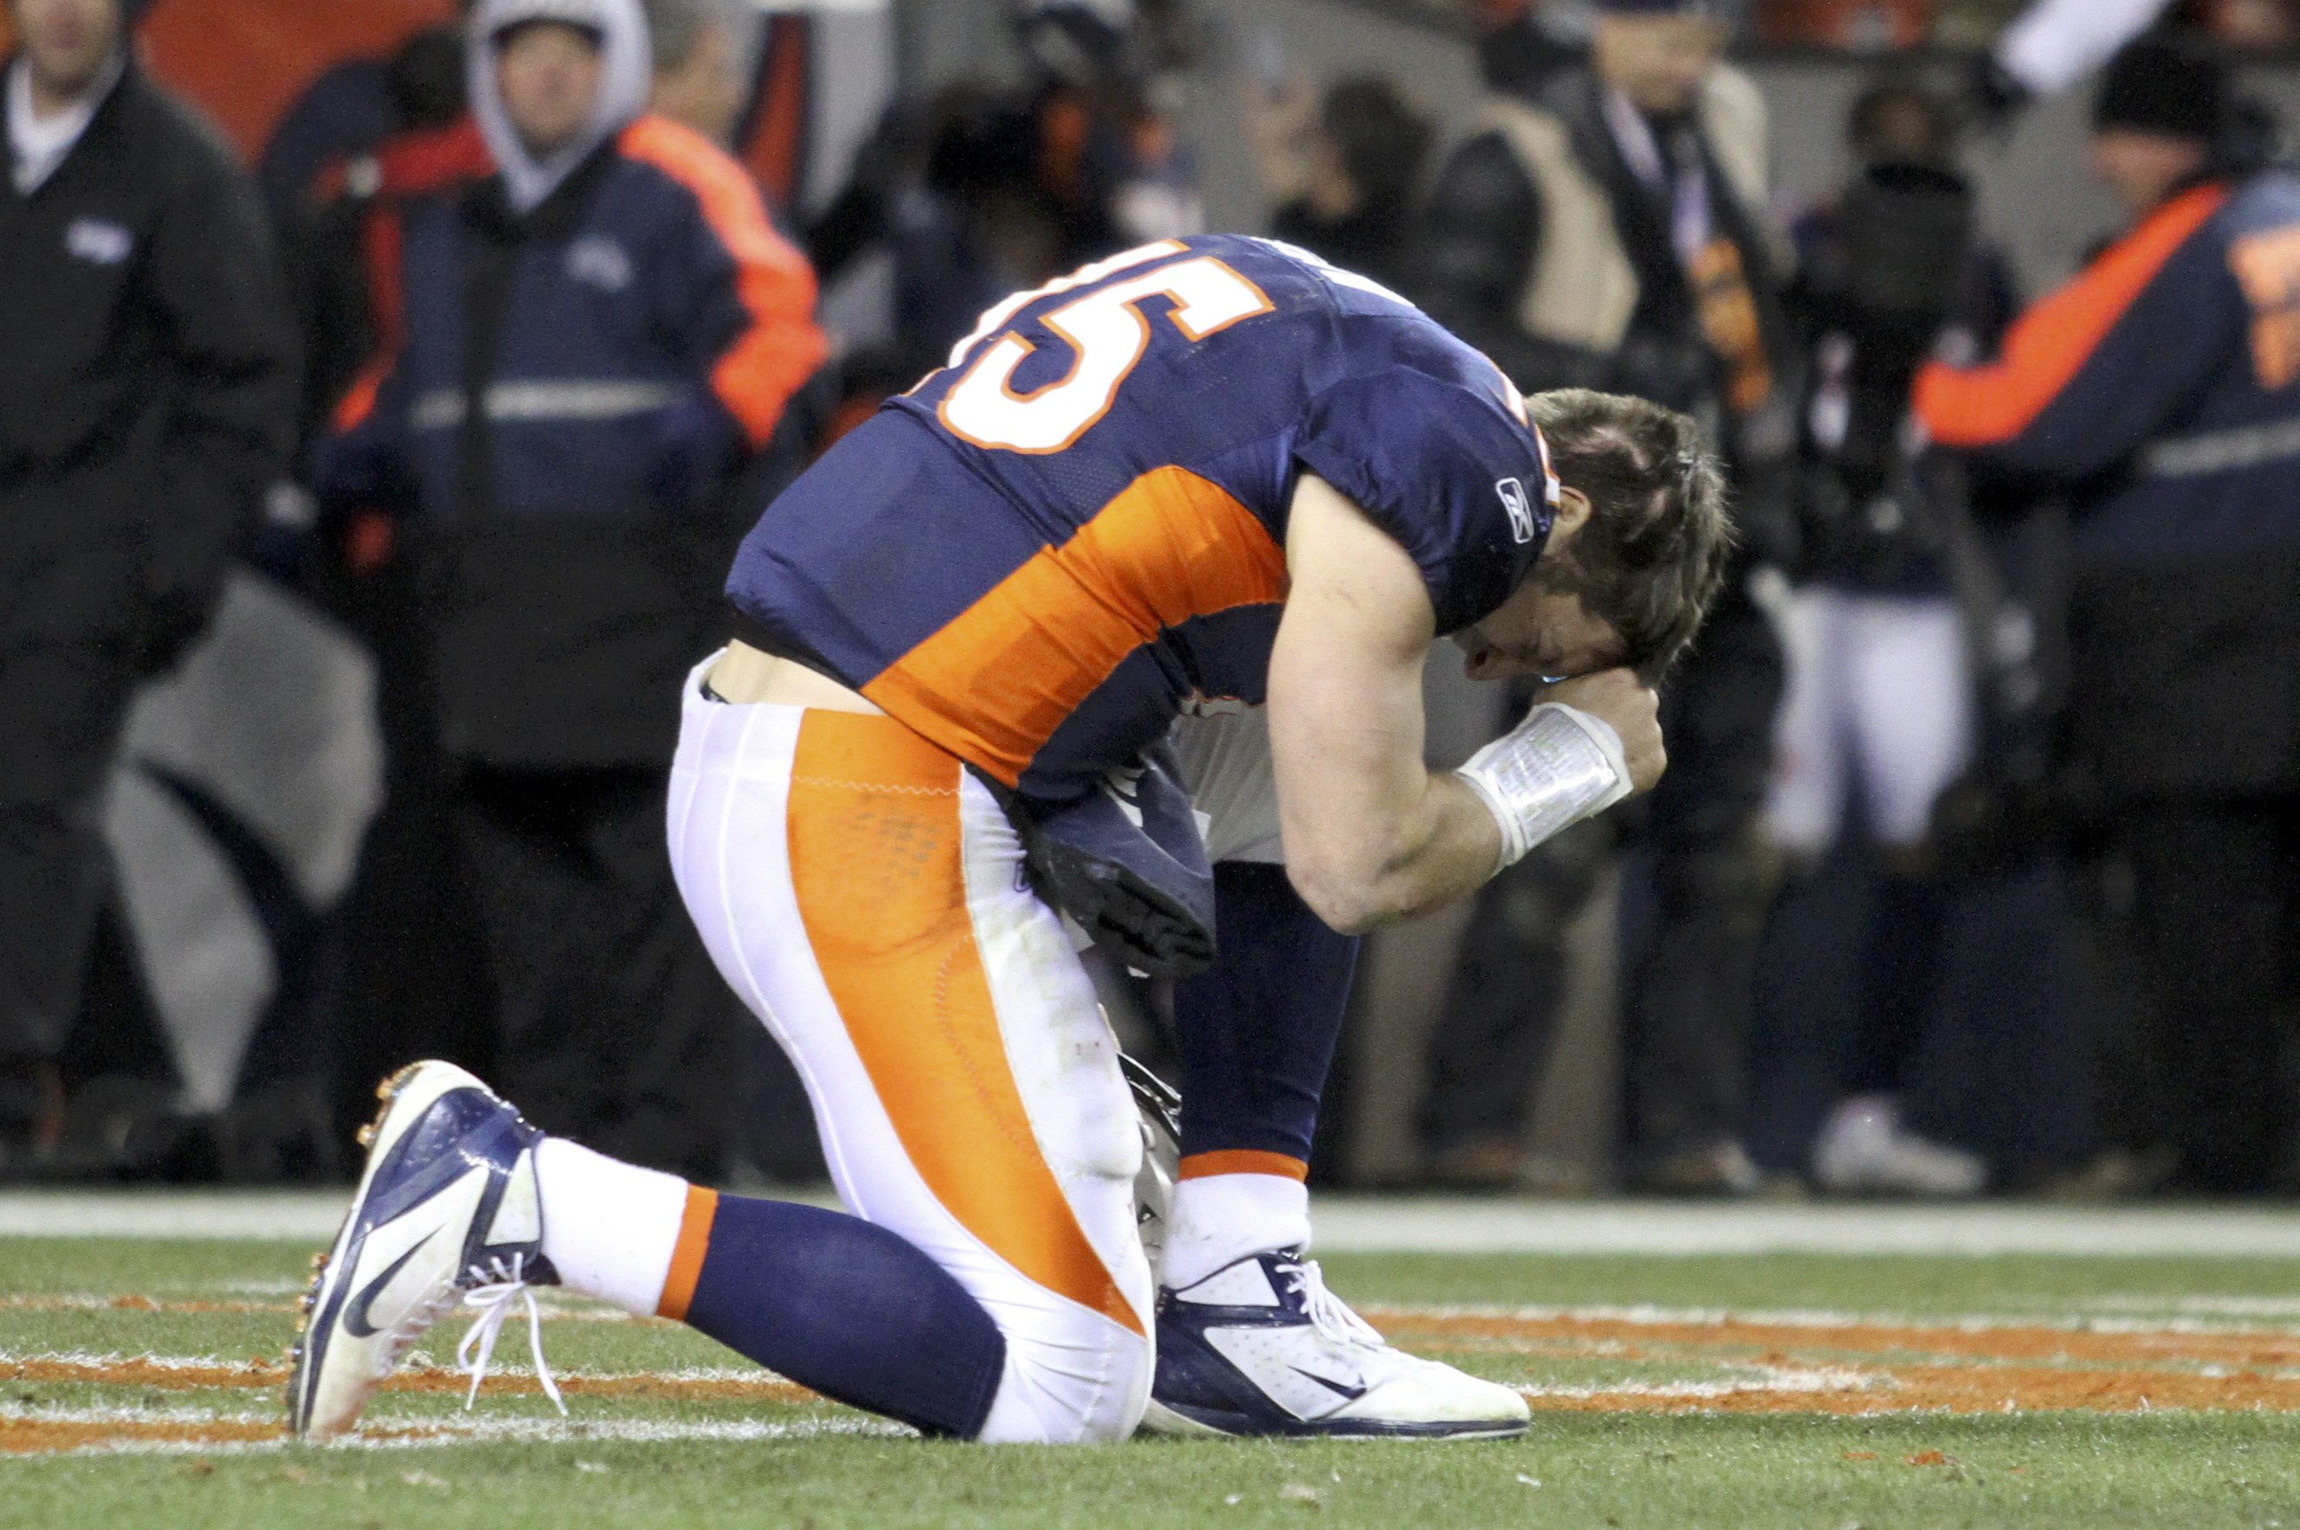 Denver Broncos quarterback Tim Tebow prays after the Broncos defeated the Pittsburgh Steelers in overtime in the National Football League AFC wild-card playoff game in Denver Jan. 8. (CNS/Reuters/Marc Piscotty)